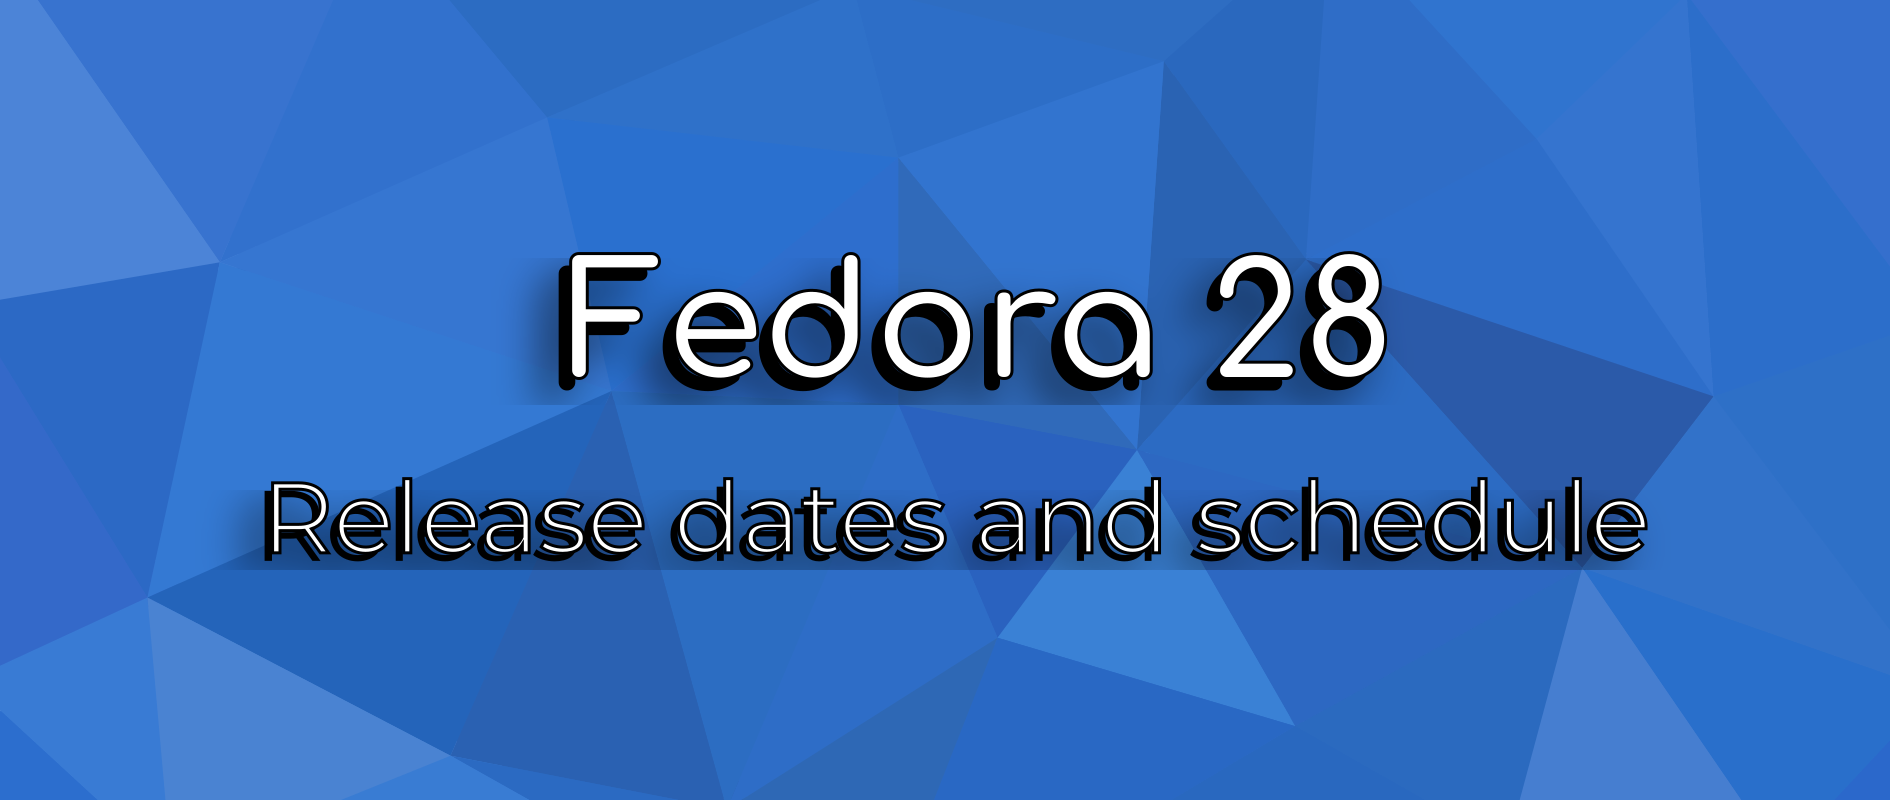 Fedora 28 release dates and schedule